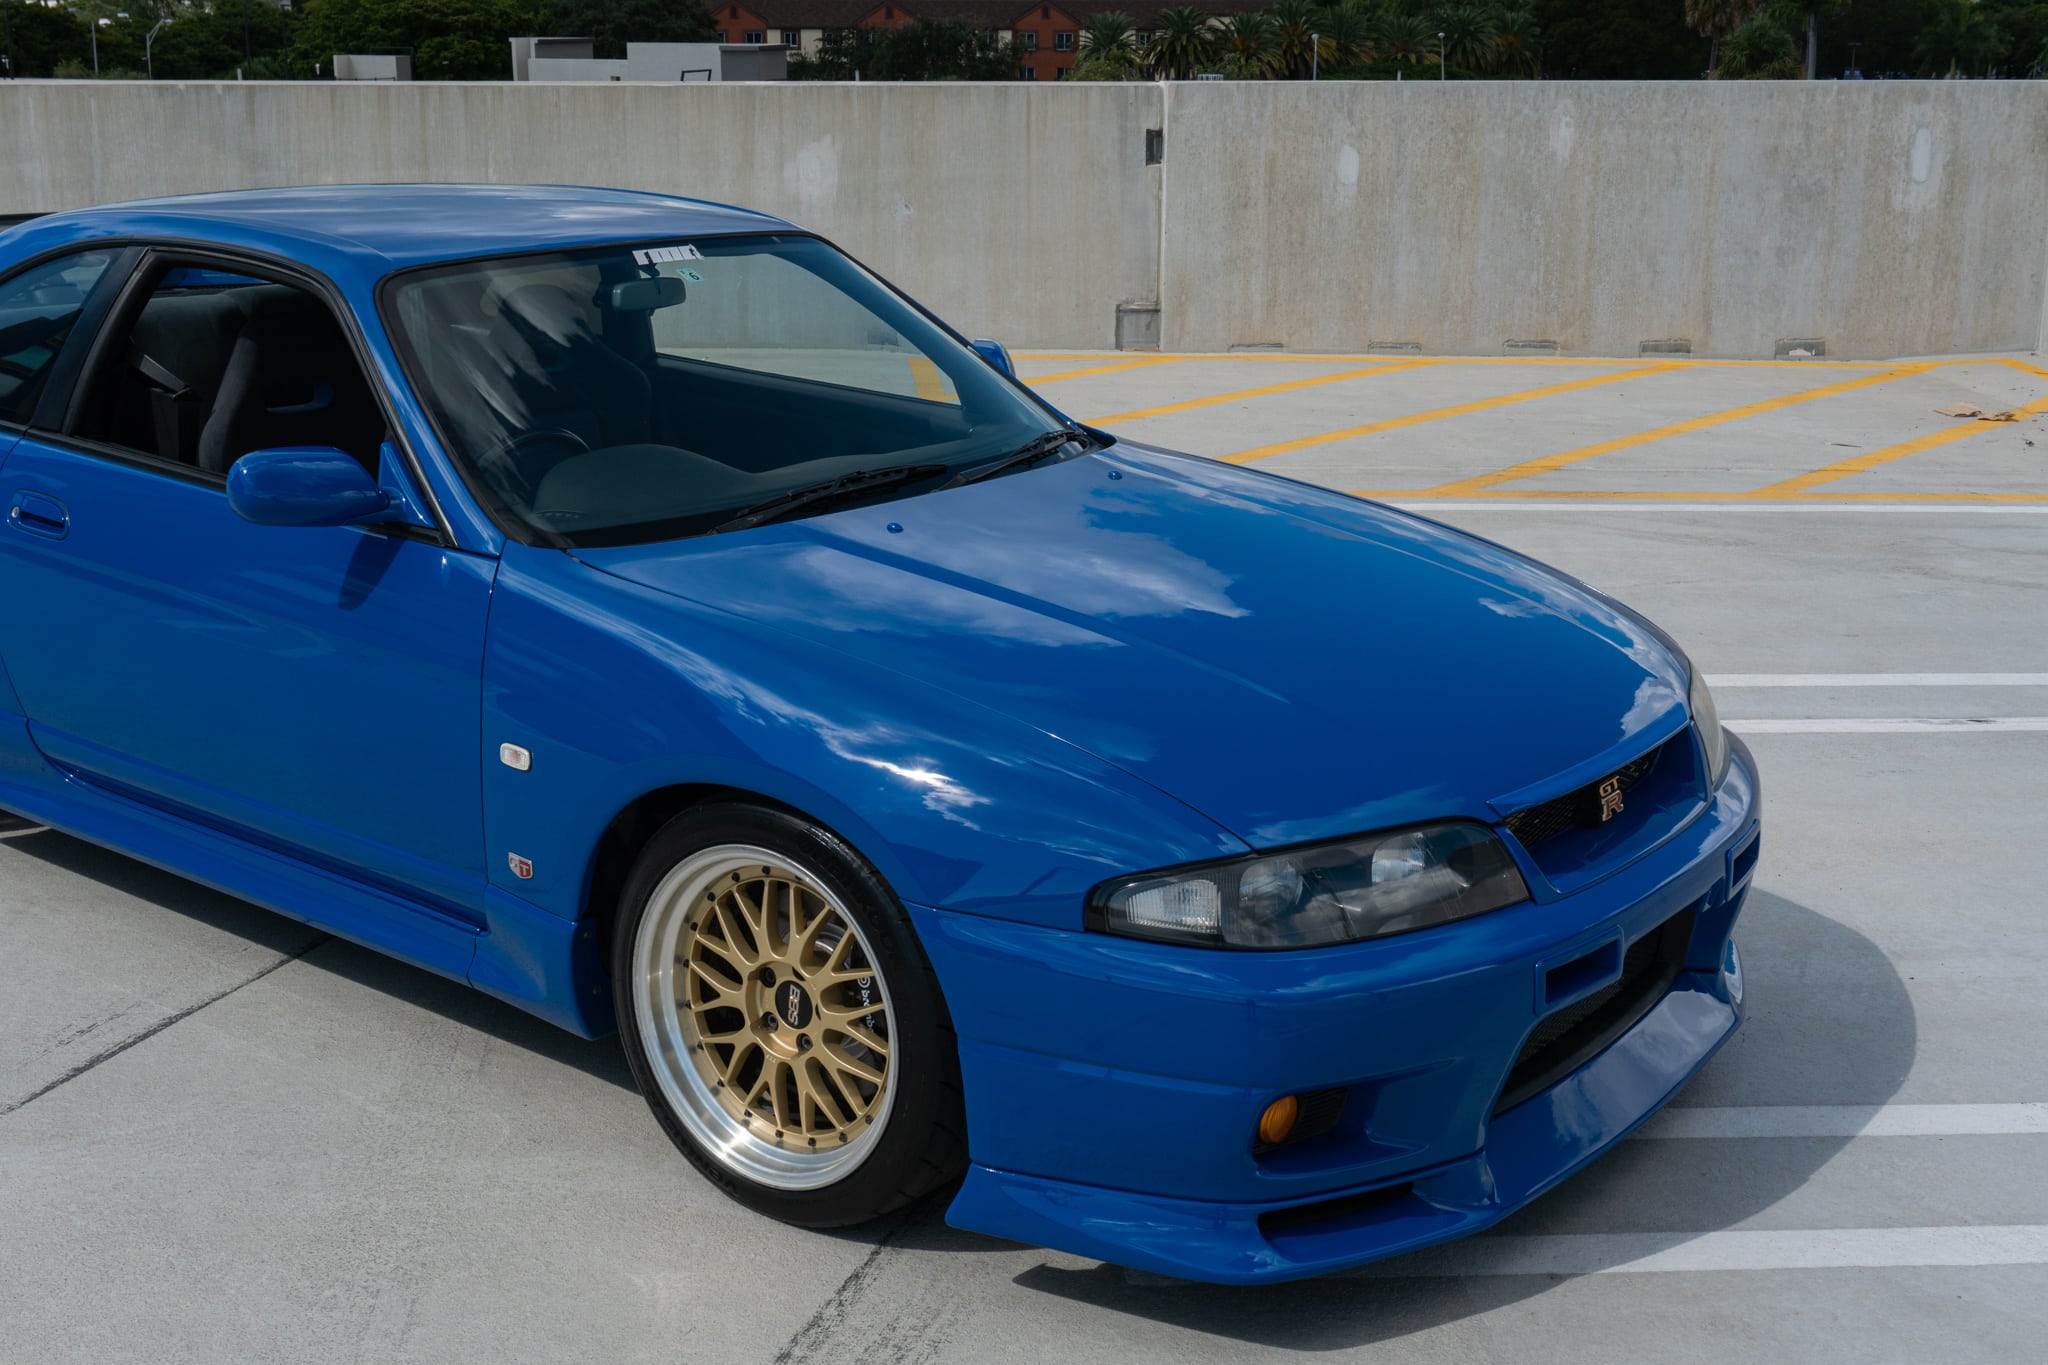 1996 Nissan GT-R R33 LM Limited | 1 of 188 LM Limited | Rare BT2 Championship Blue | Lightly Tuned | HKS | BBS